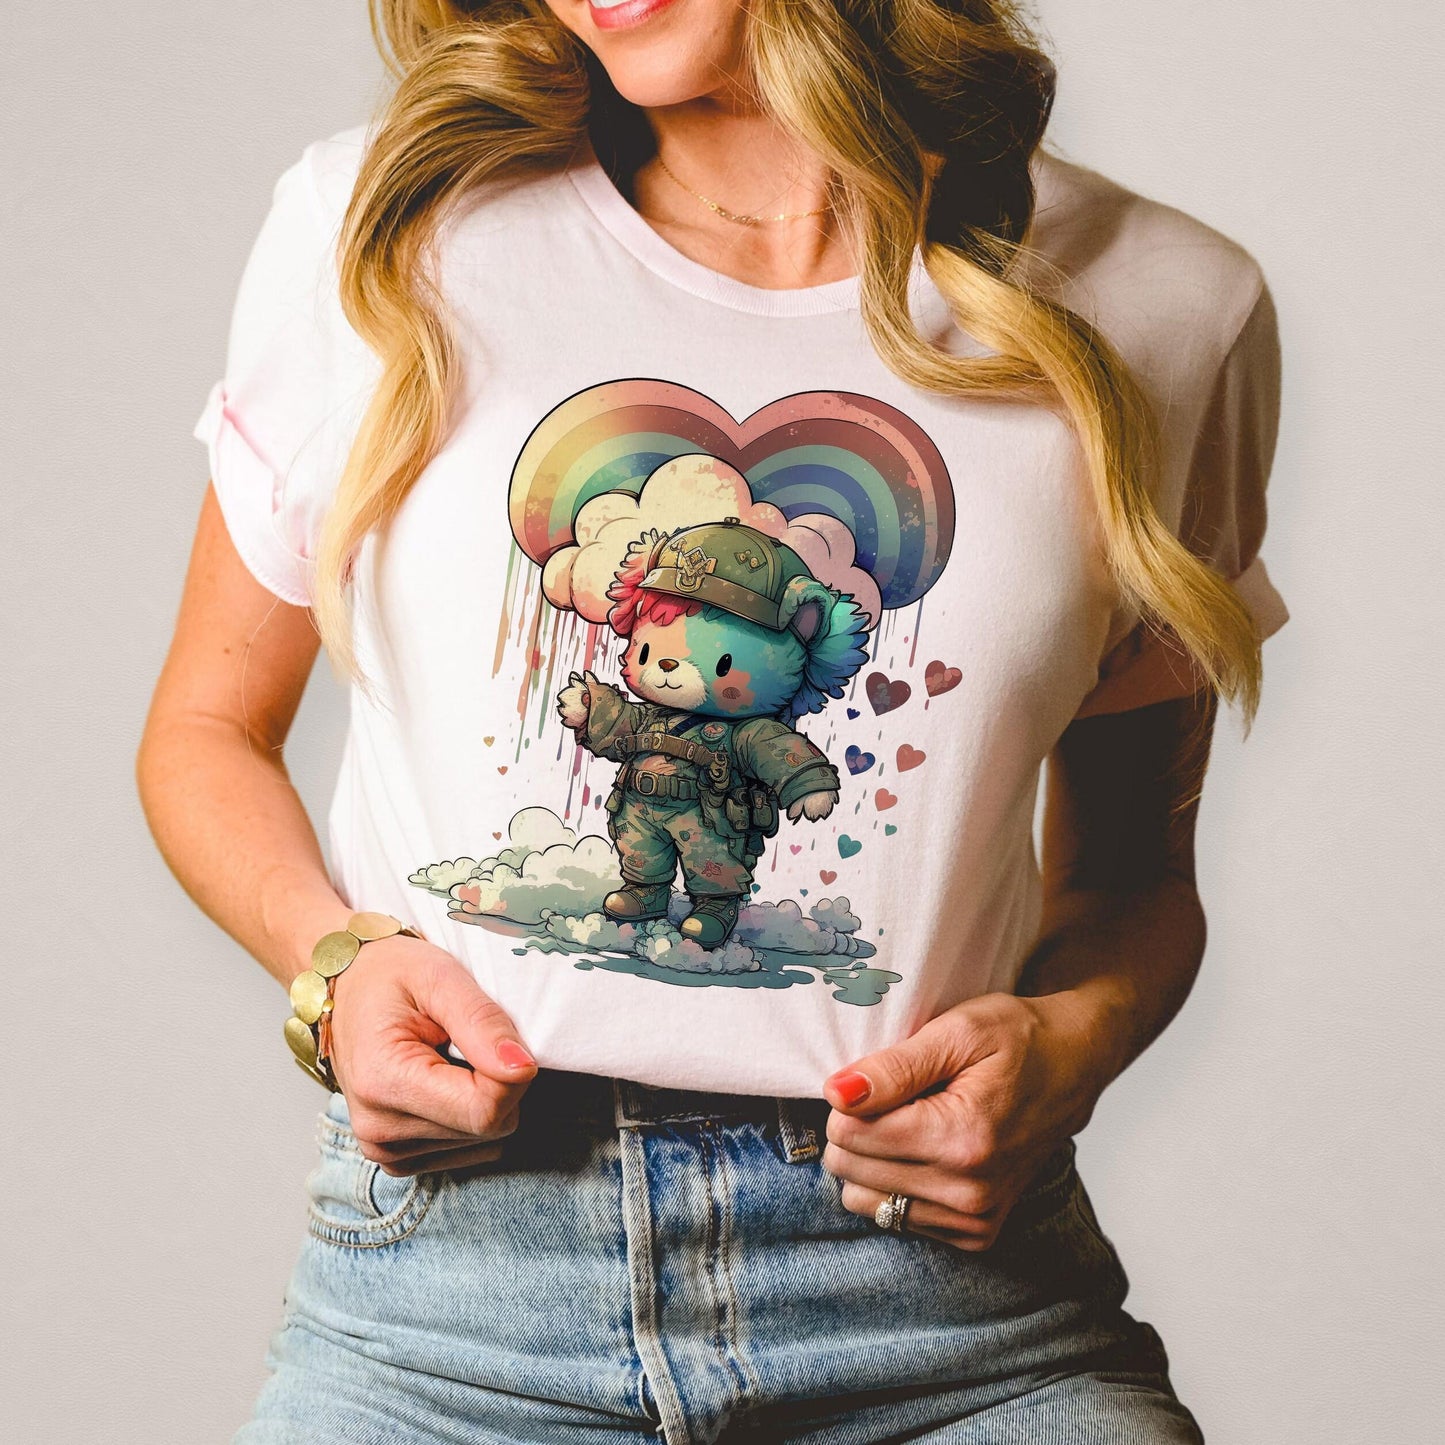 Illustrated Bears that Care 80s 1980s Army Brat Nostalgia Parody AI Generated Graphic Tee Unisex Soft Tee T-shirt for Women or Men